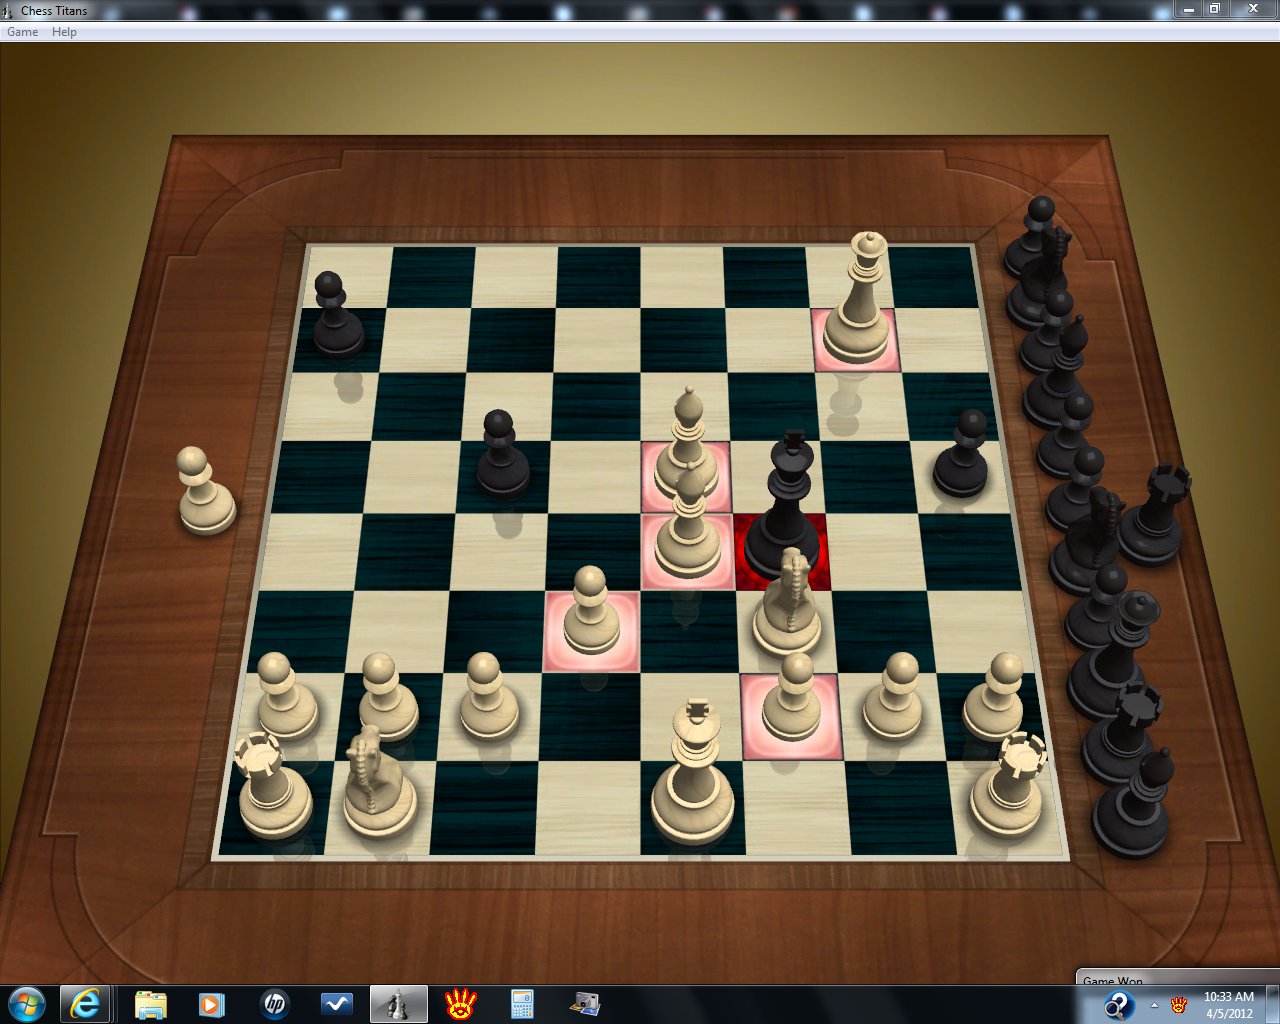 play chess online witha real chess board